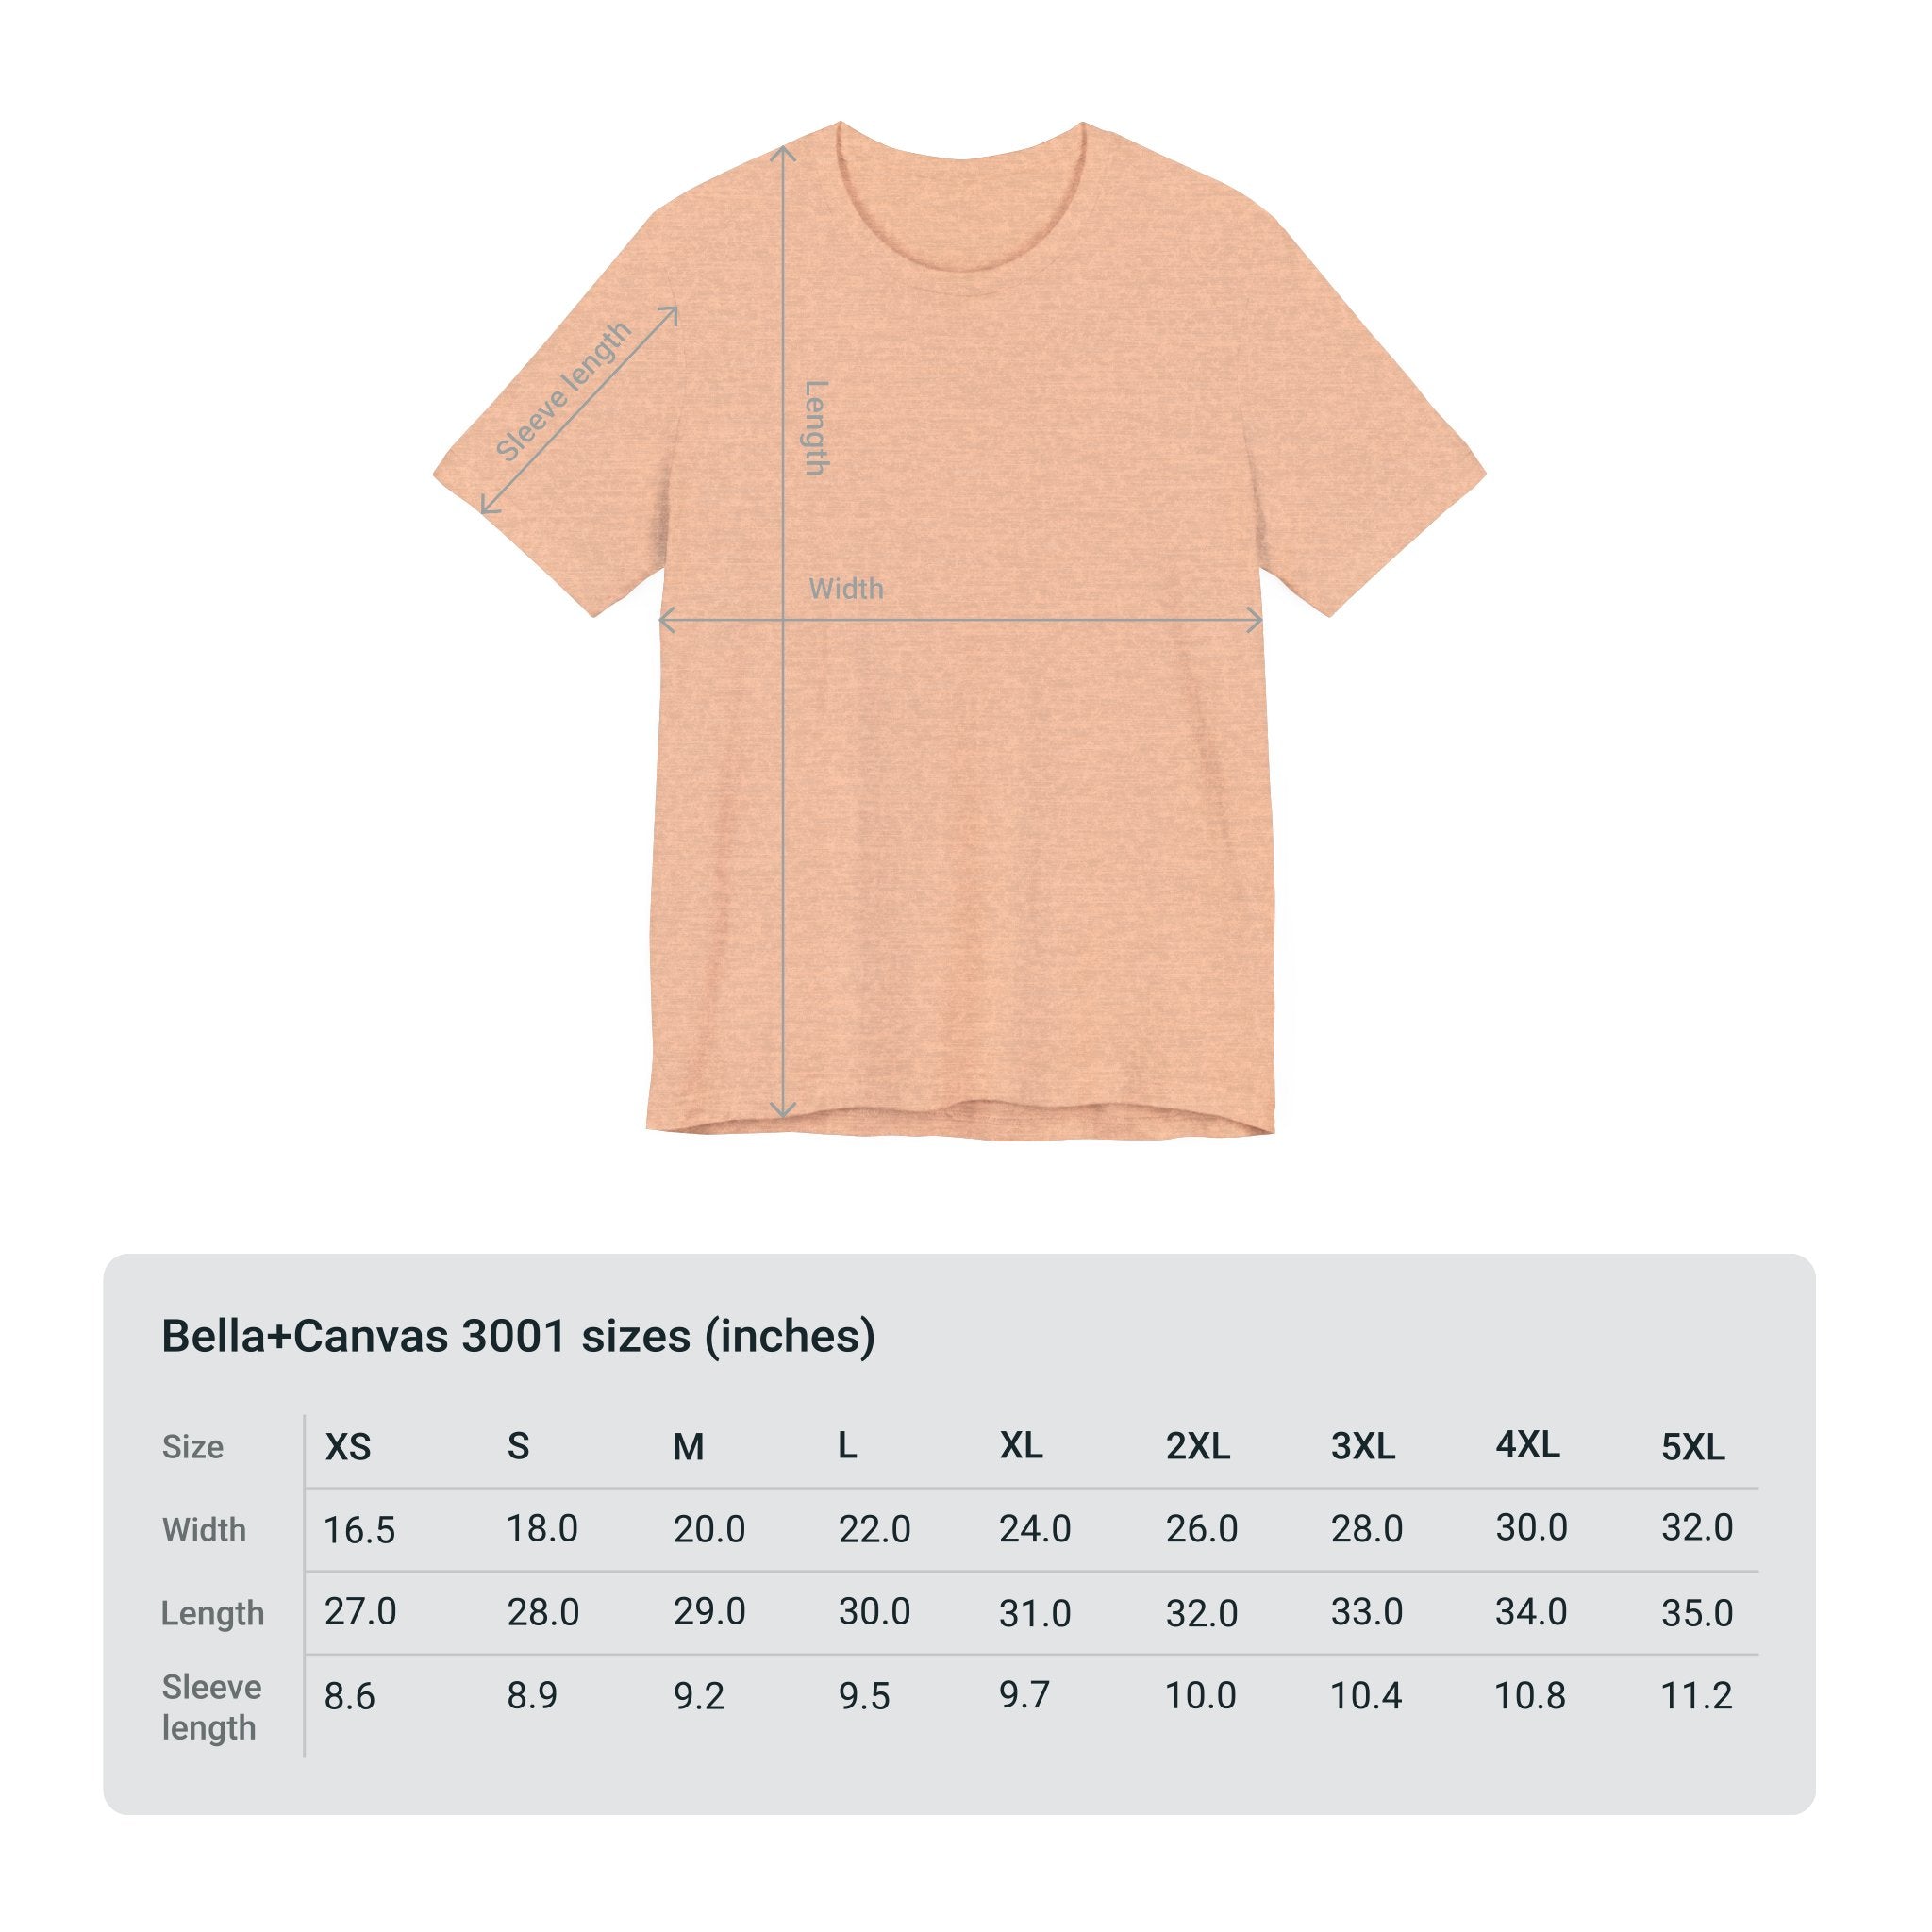 Adventure Unlimited Surfing T-Shirt Size Guide for Bella Canvas EU - Direct-to-Garment Printed Item